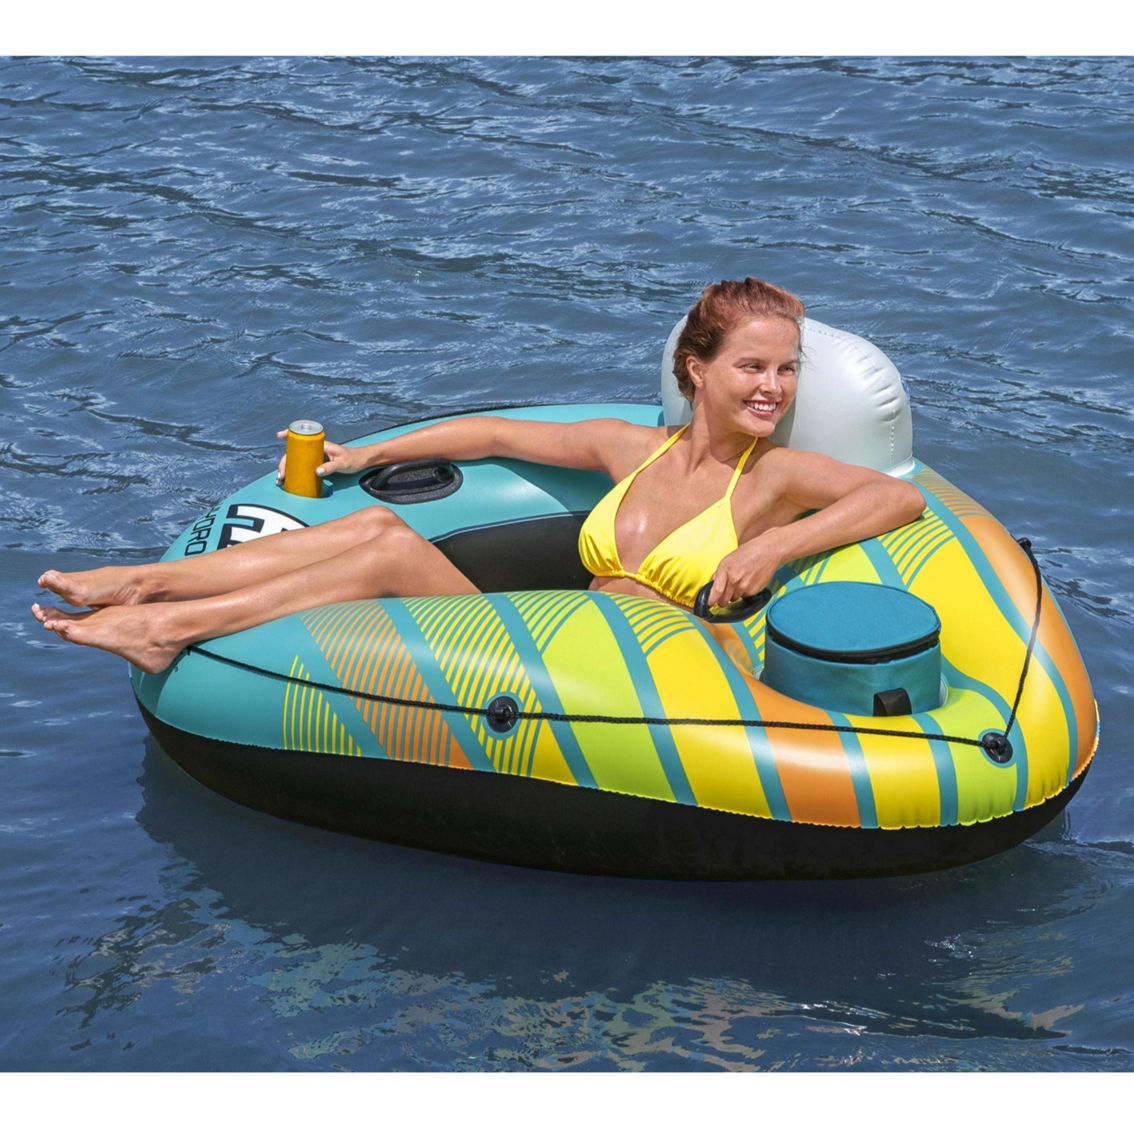 Bestway Hydro Force Alpine River Tube with Cooler - Image 3 of 4